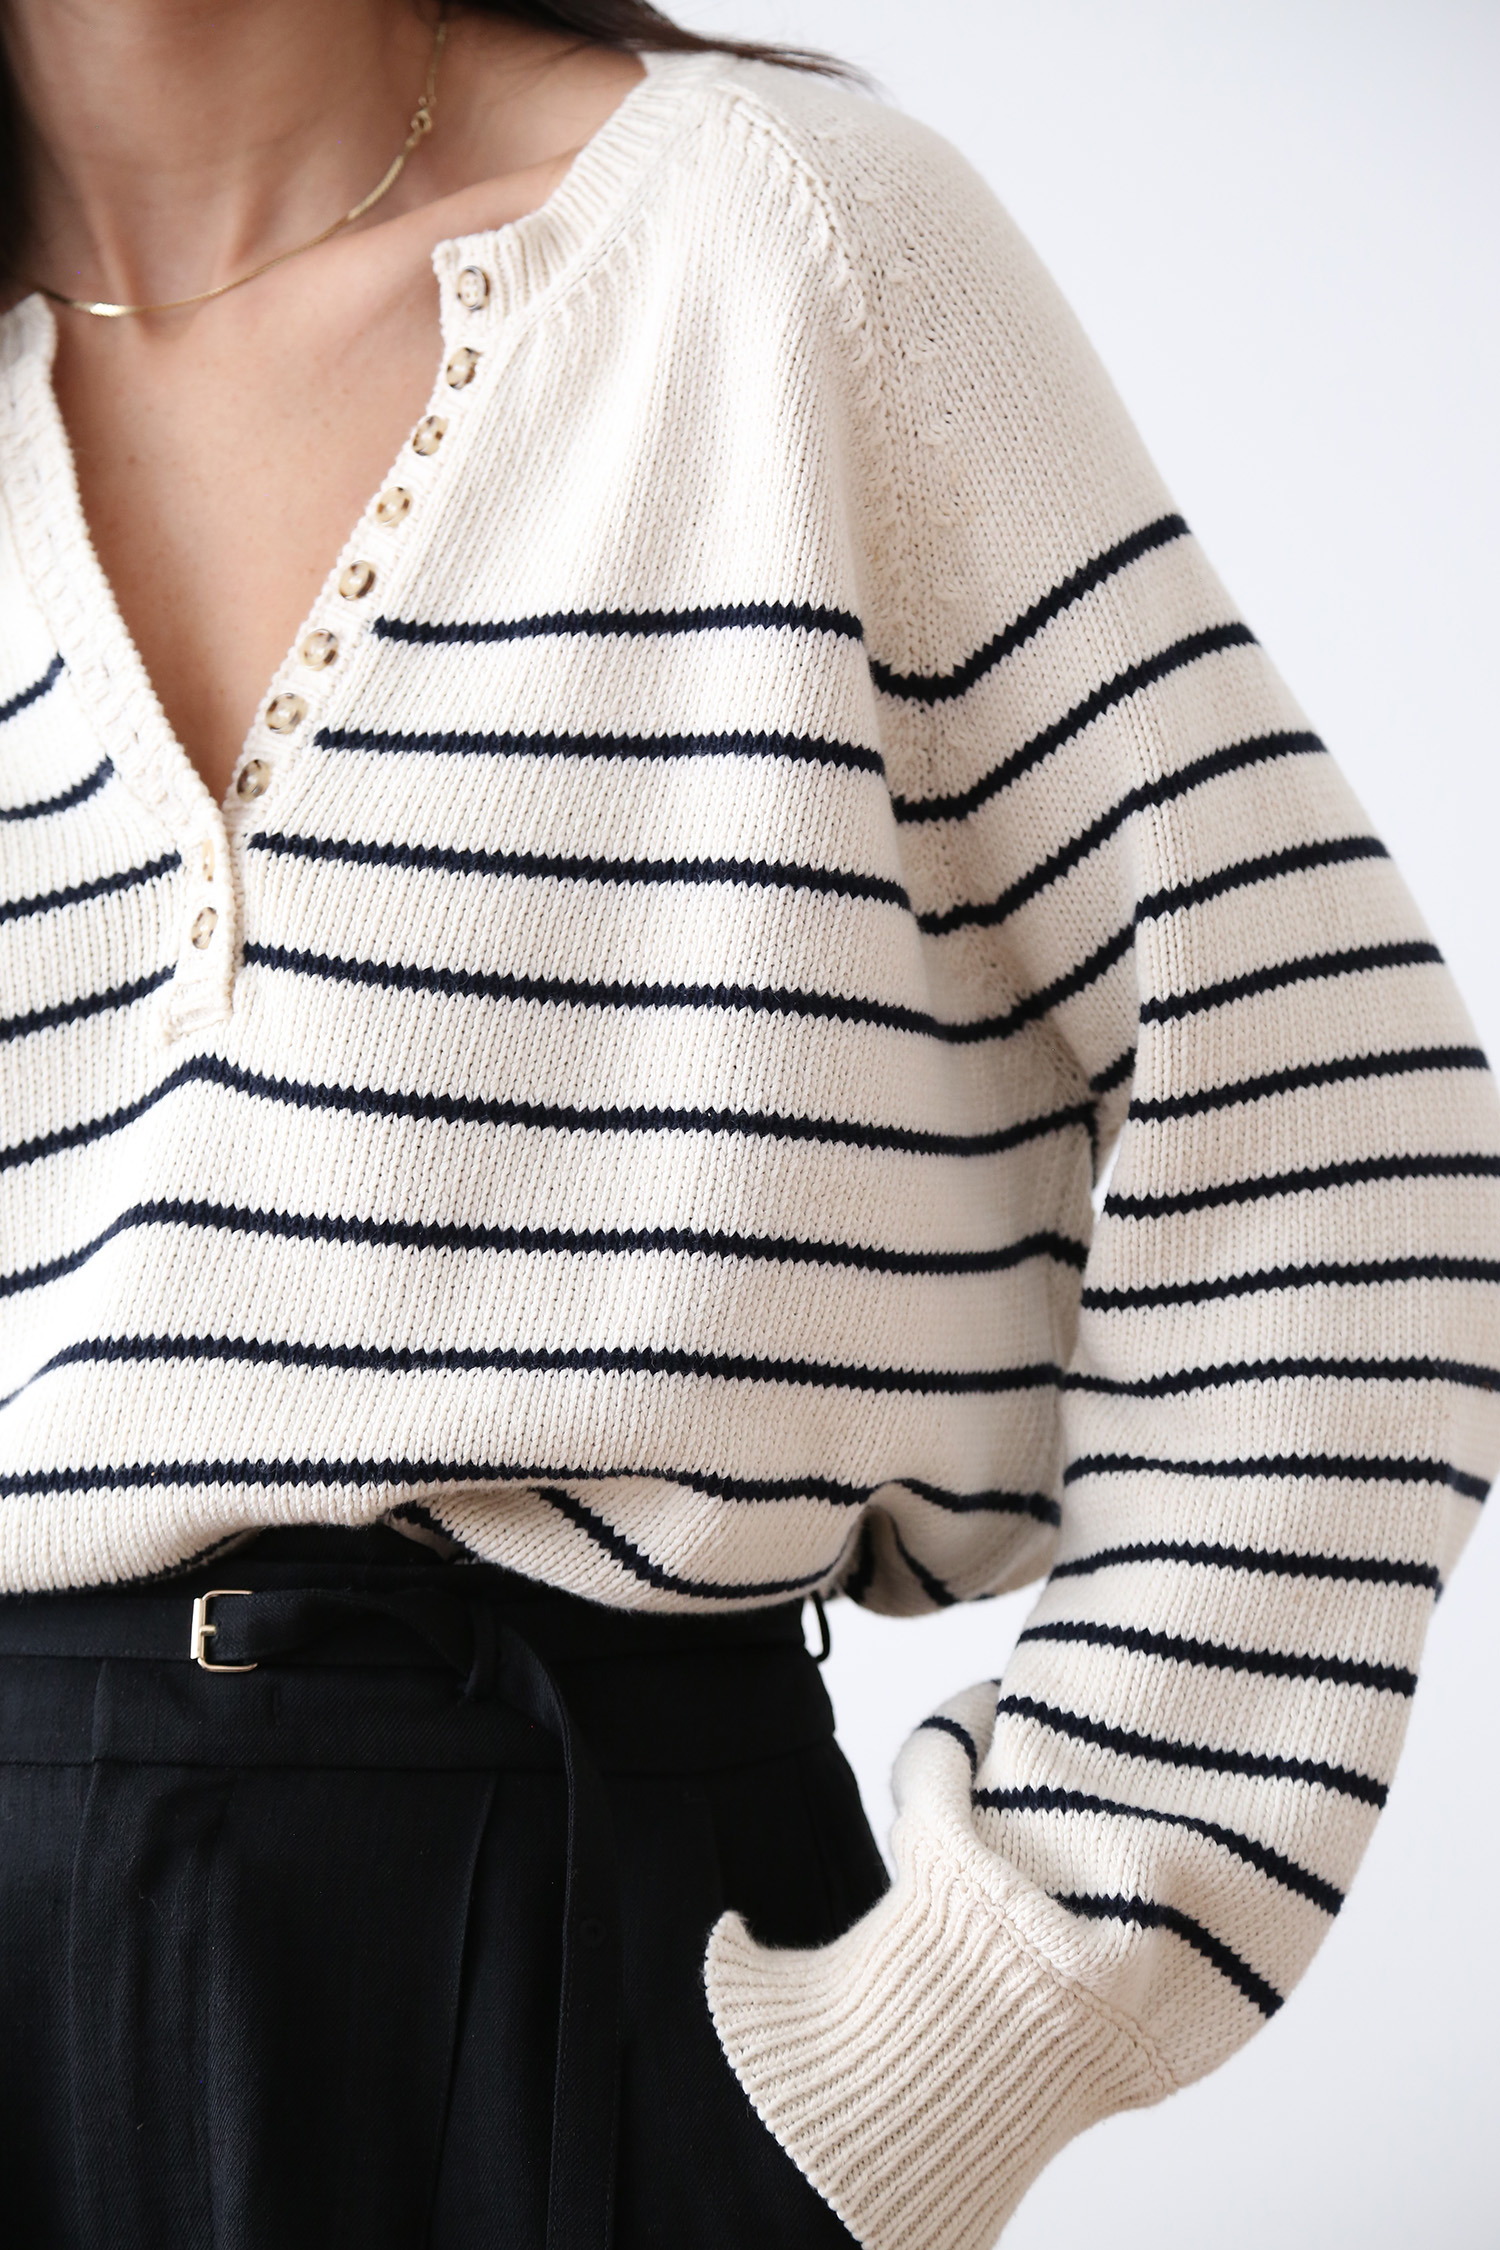 Parisian French Brands Classic Striped Top